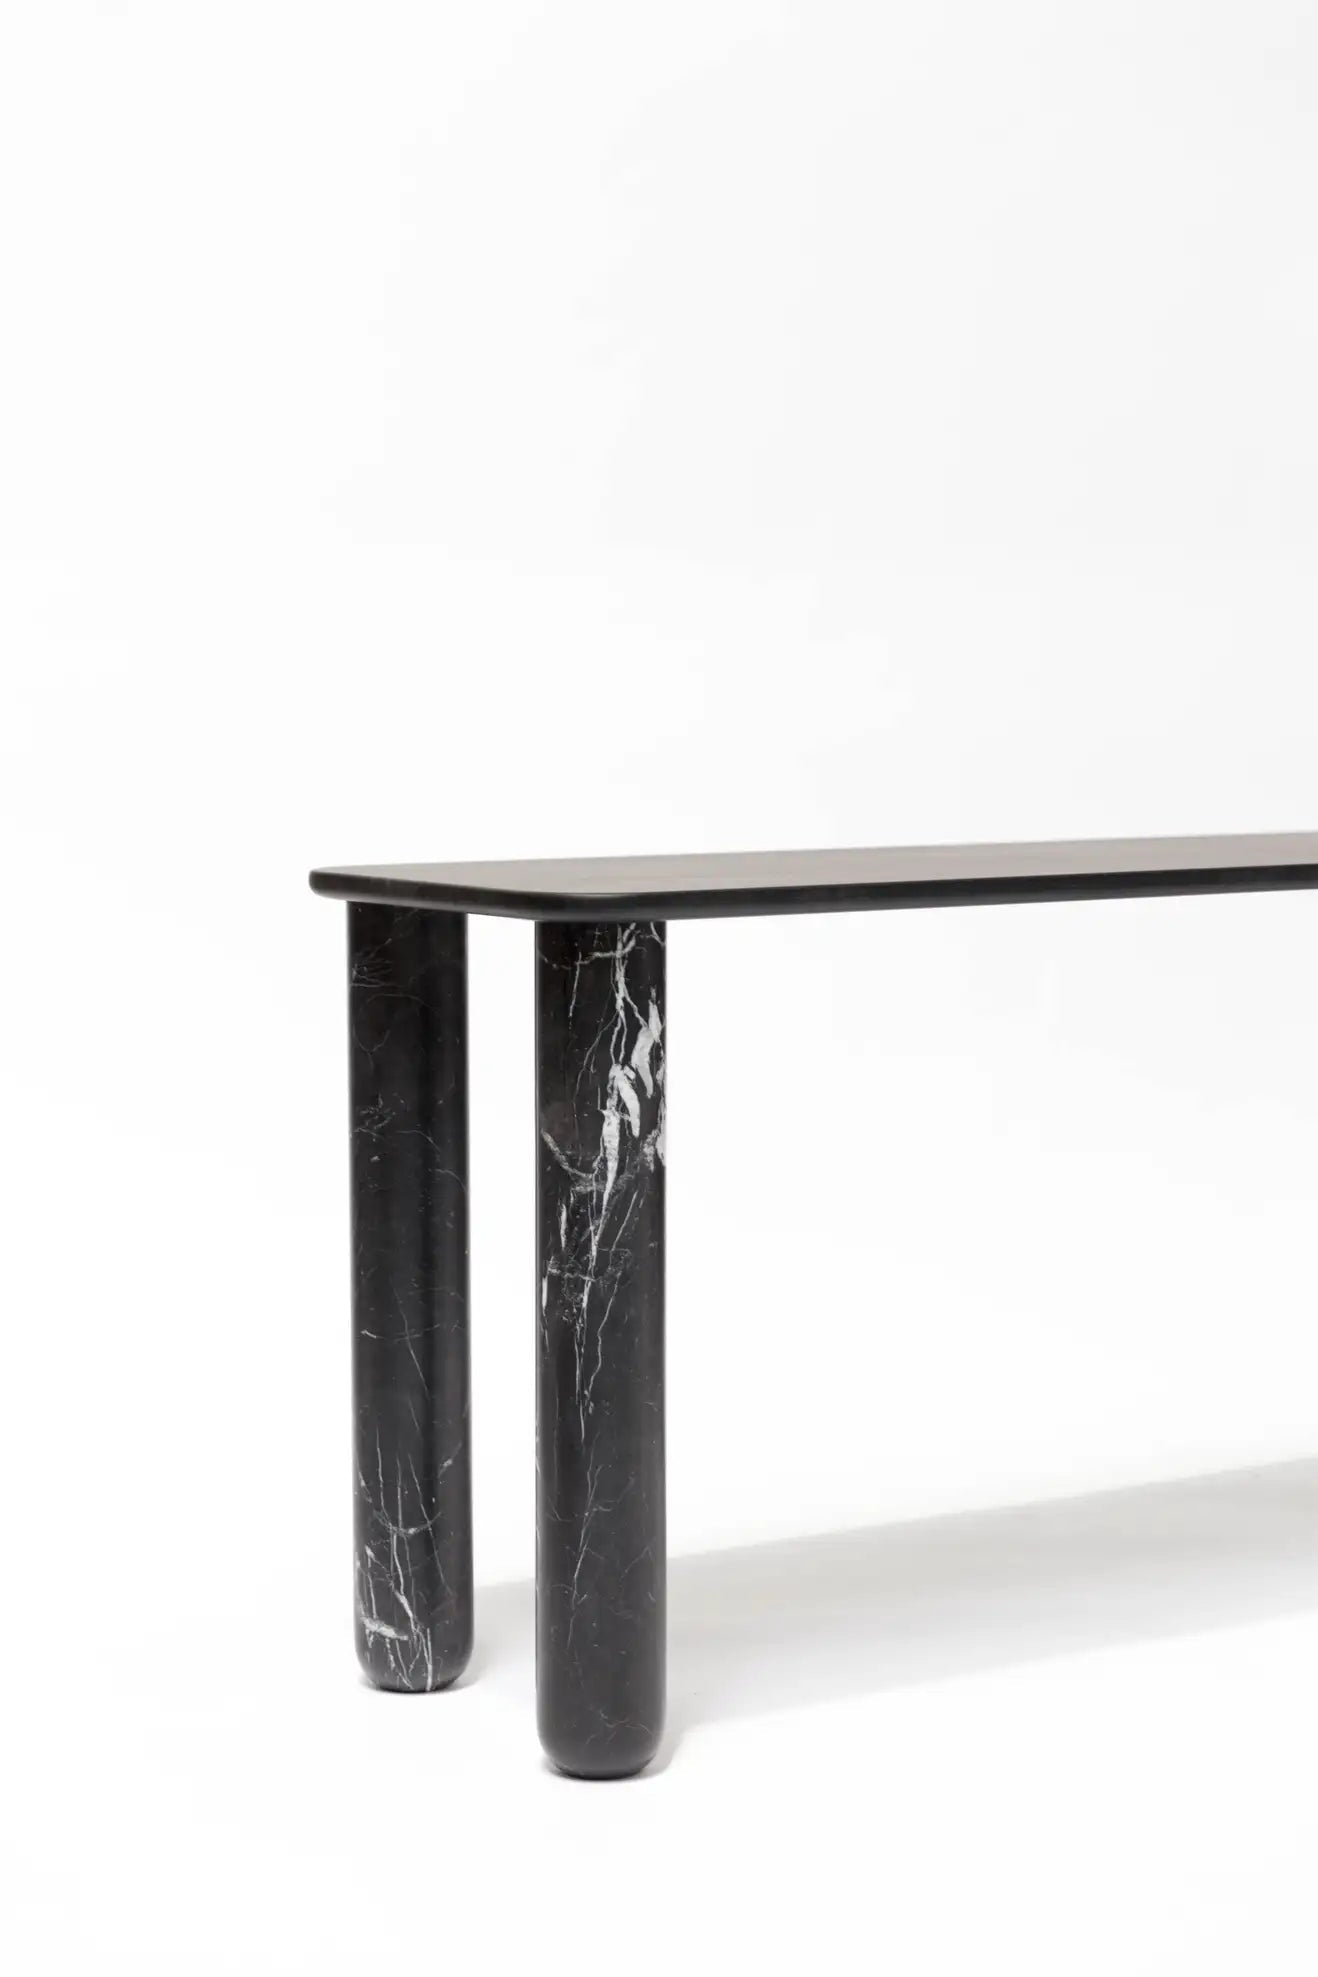 Sogne Grigio Perla Marble Dining Table - Elsa Home And Beauty